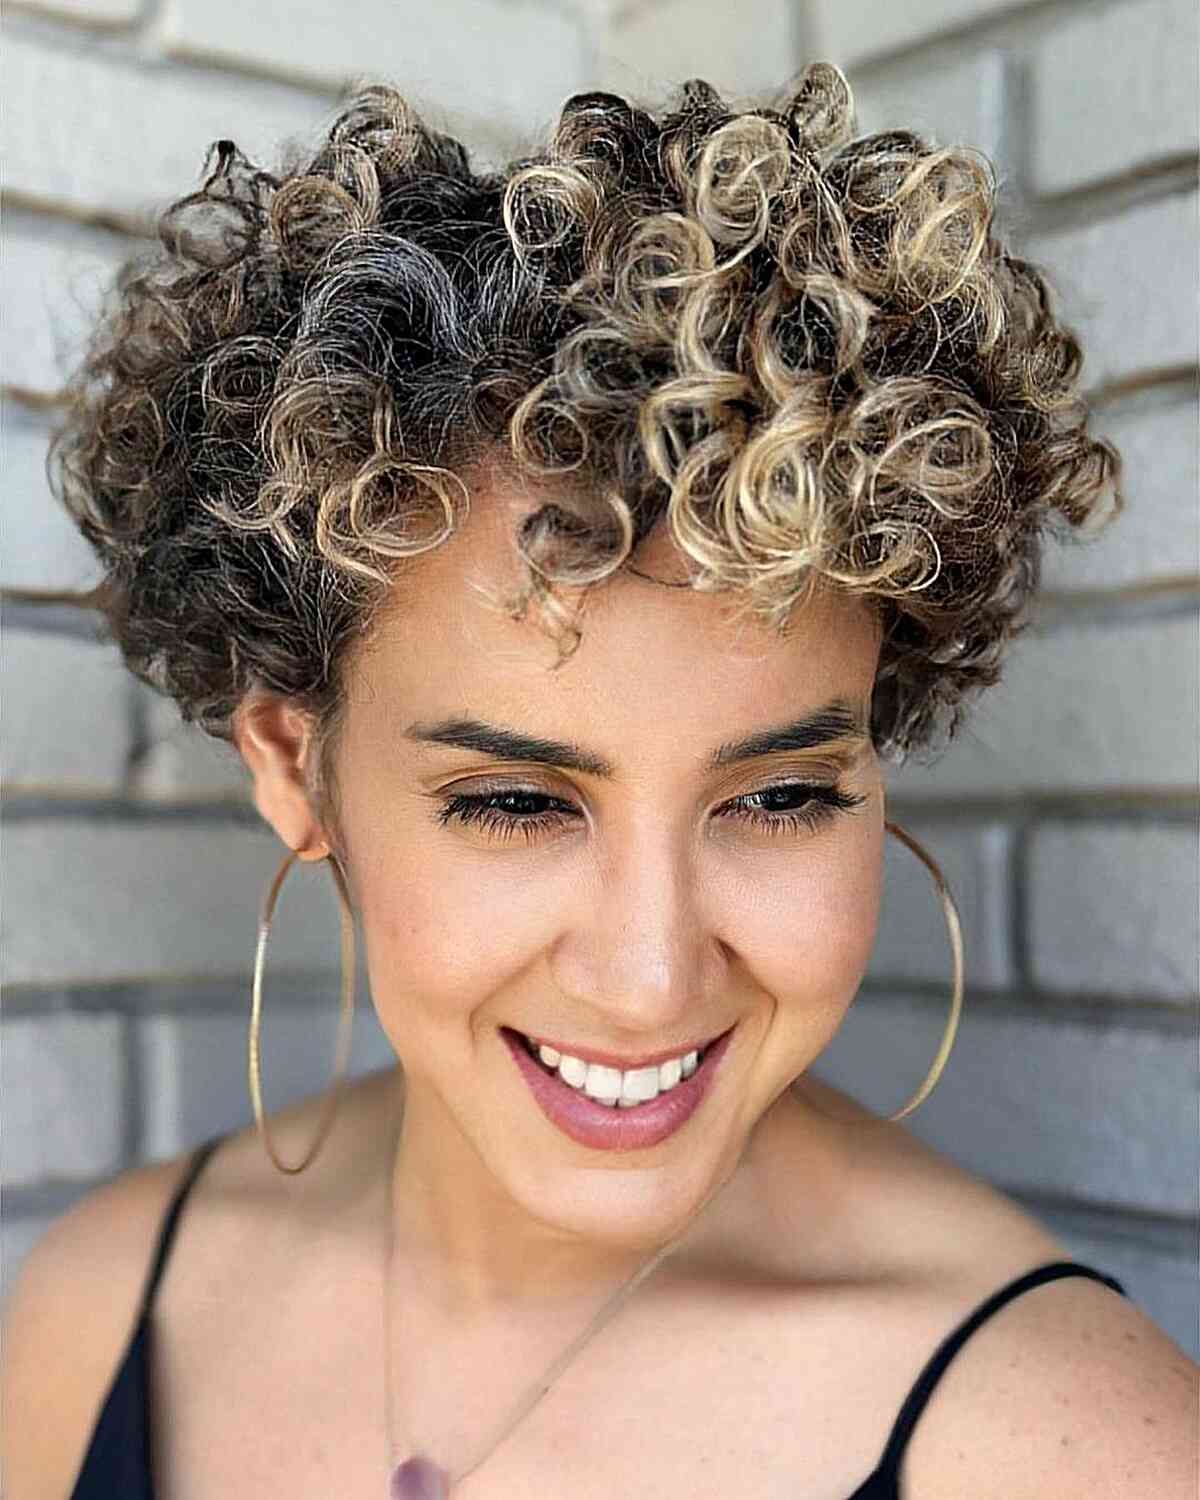 11 Short Curly Hairstyles That Will Make You Book a Cut | Who What Wear UK